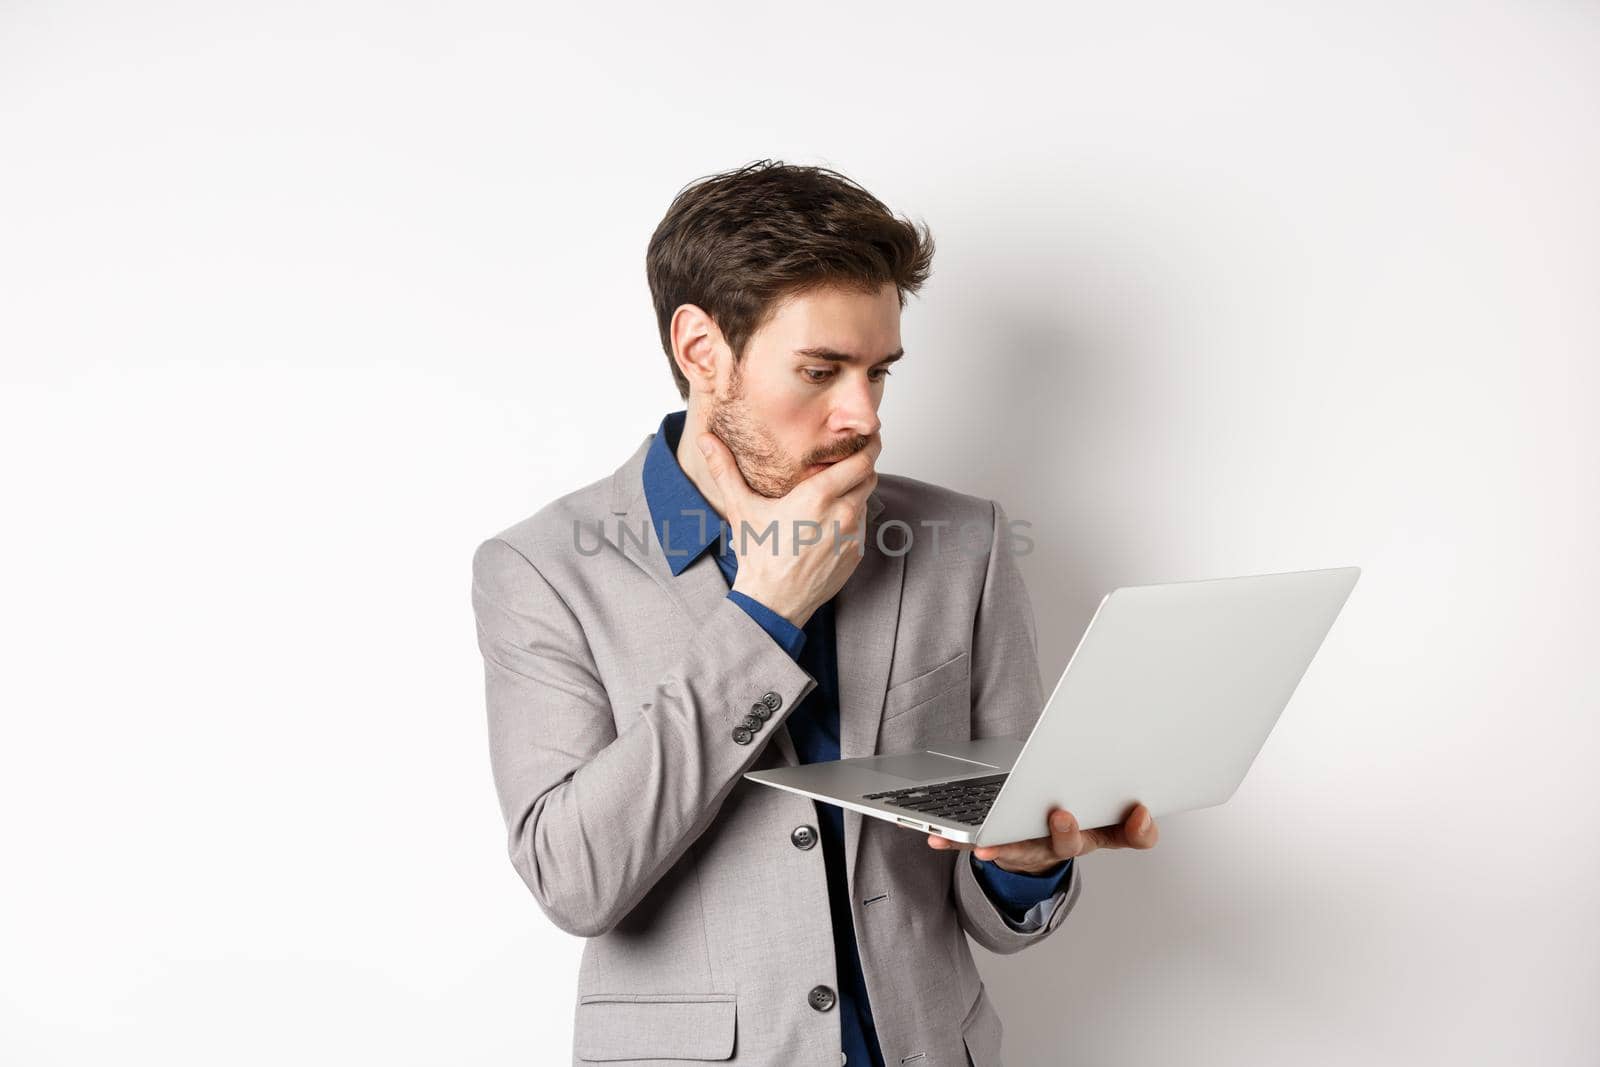 Shocked office worker in suit looking worried at laptop screen, having trouble at work, standing on white background.